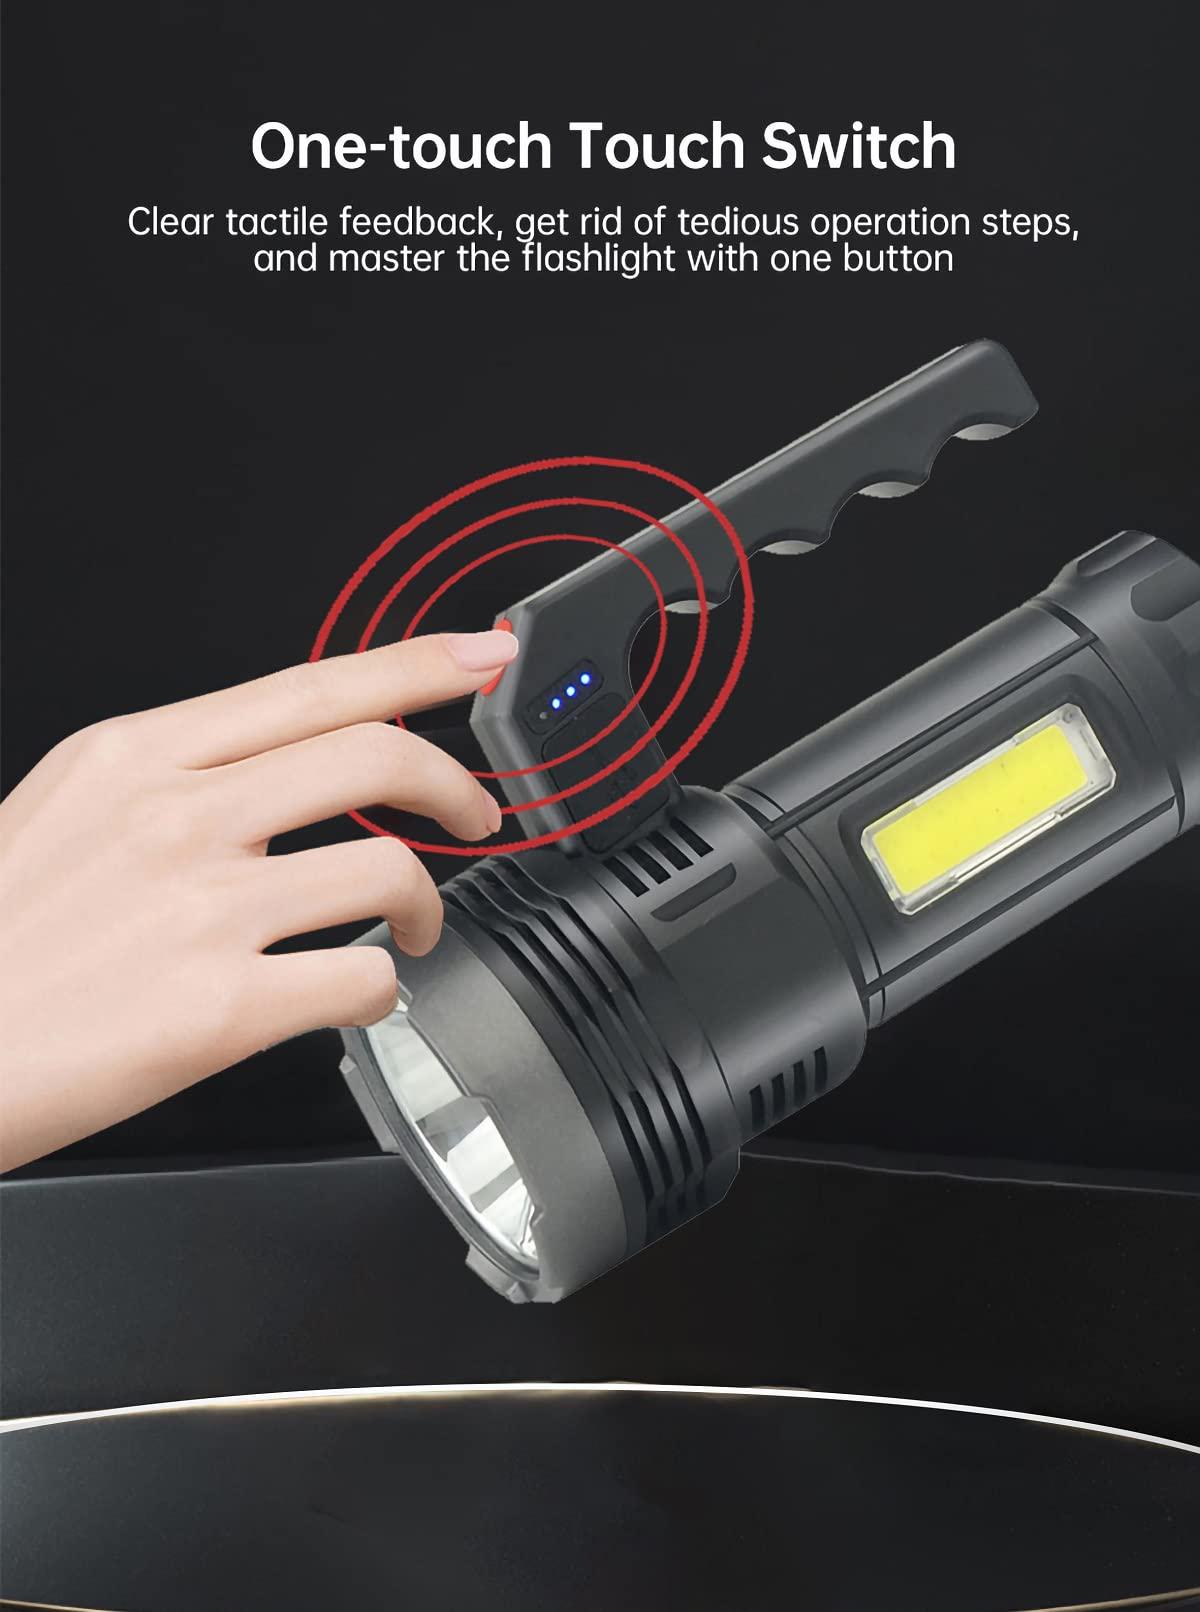 owq solar/rechargeable multi-function 1200 lumens led flashlight, with emergency strobe light , emergency power supply, togat